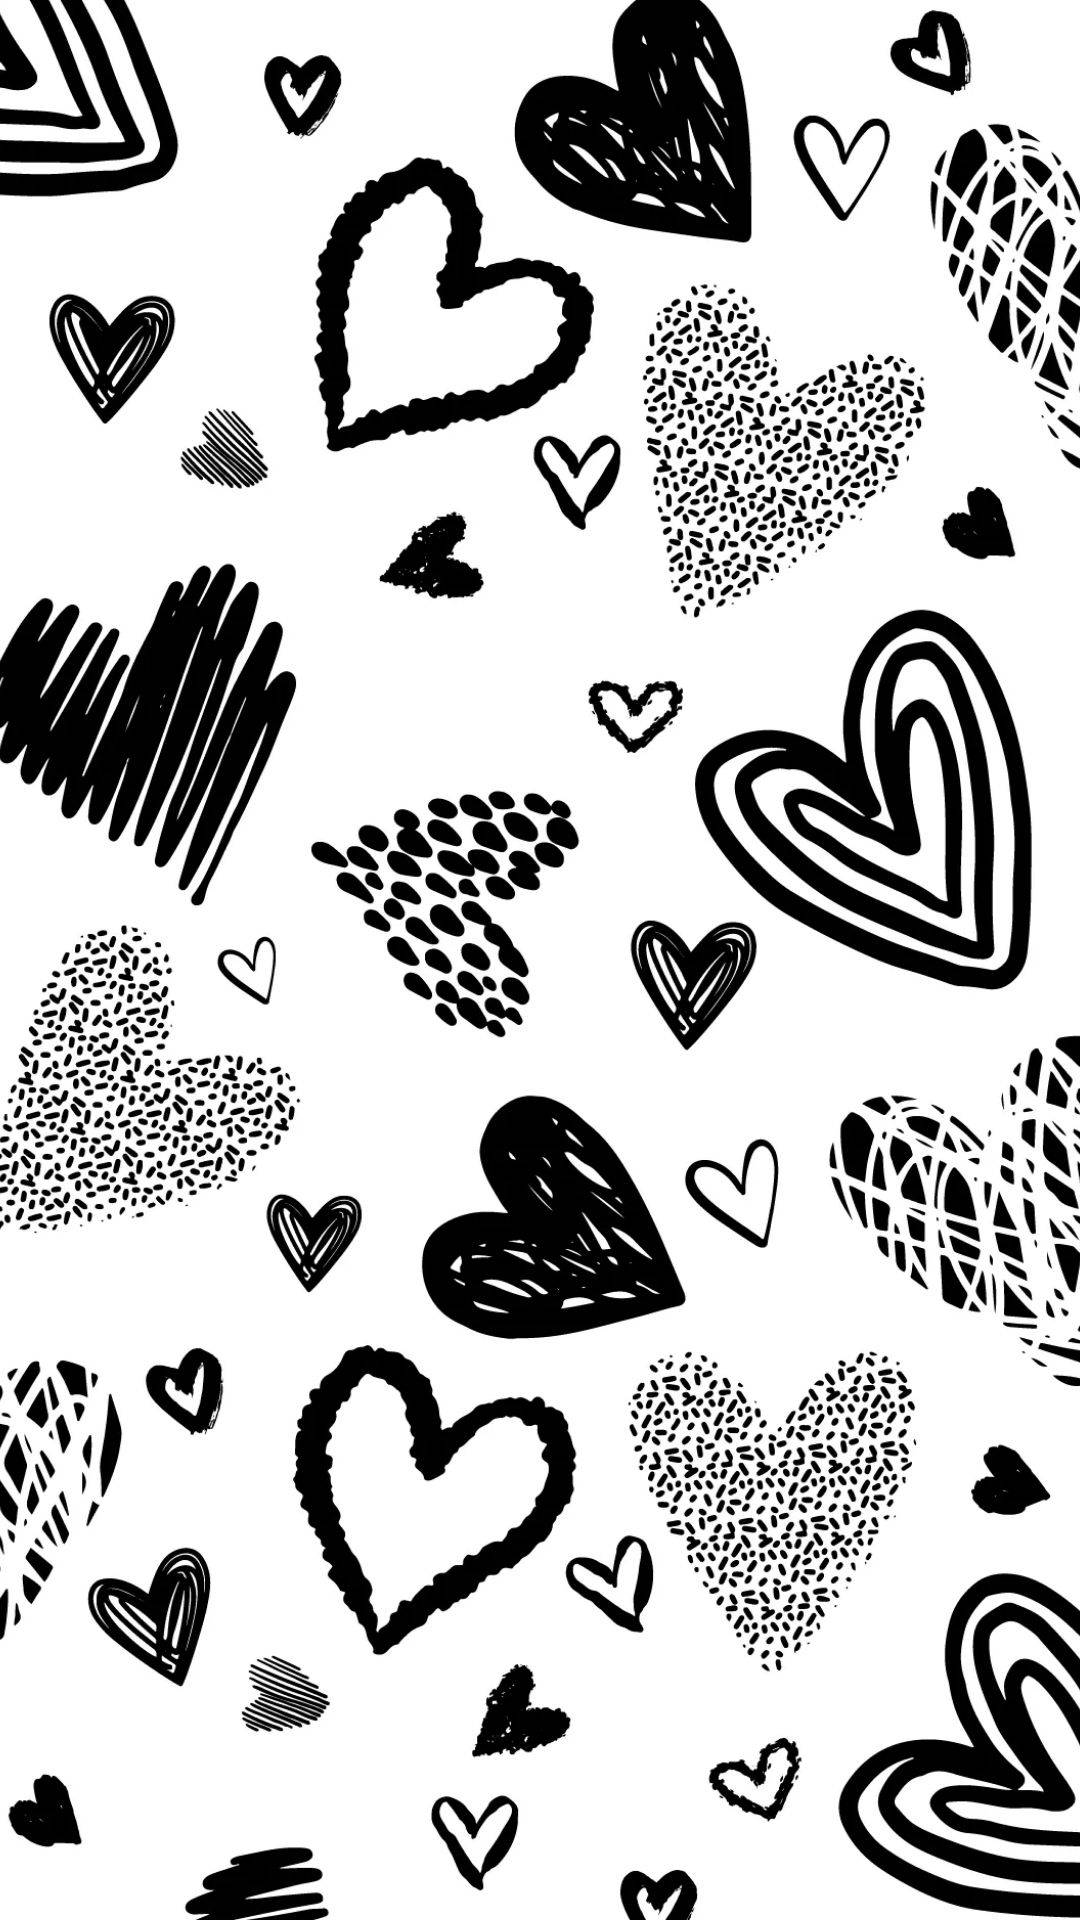 A black and white pattern of hearts. - Cute white